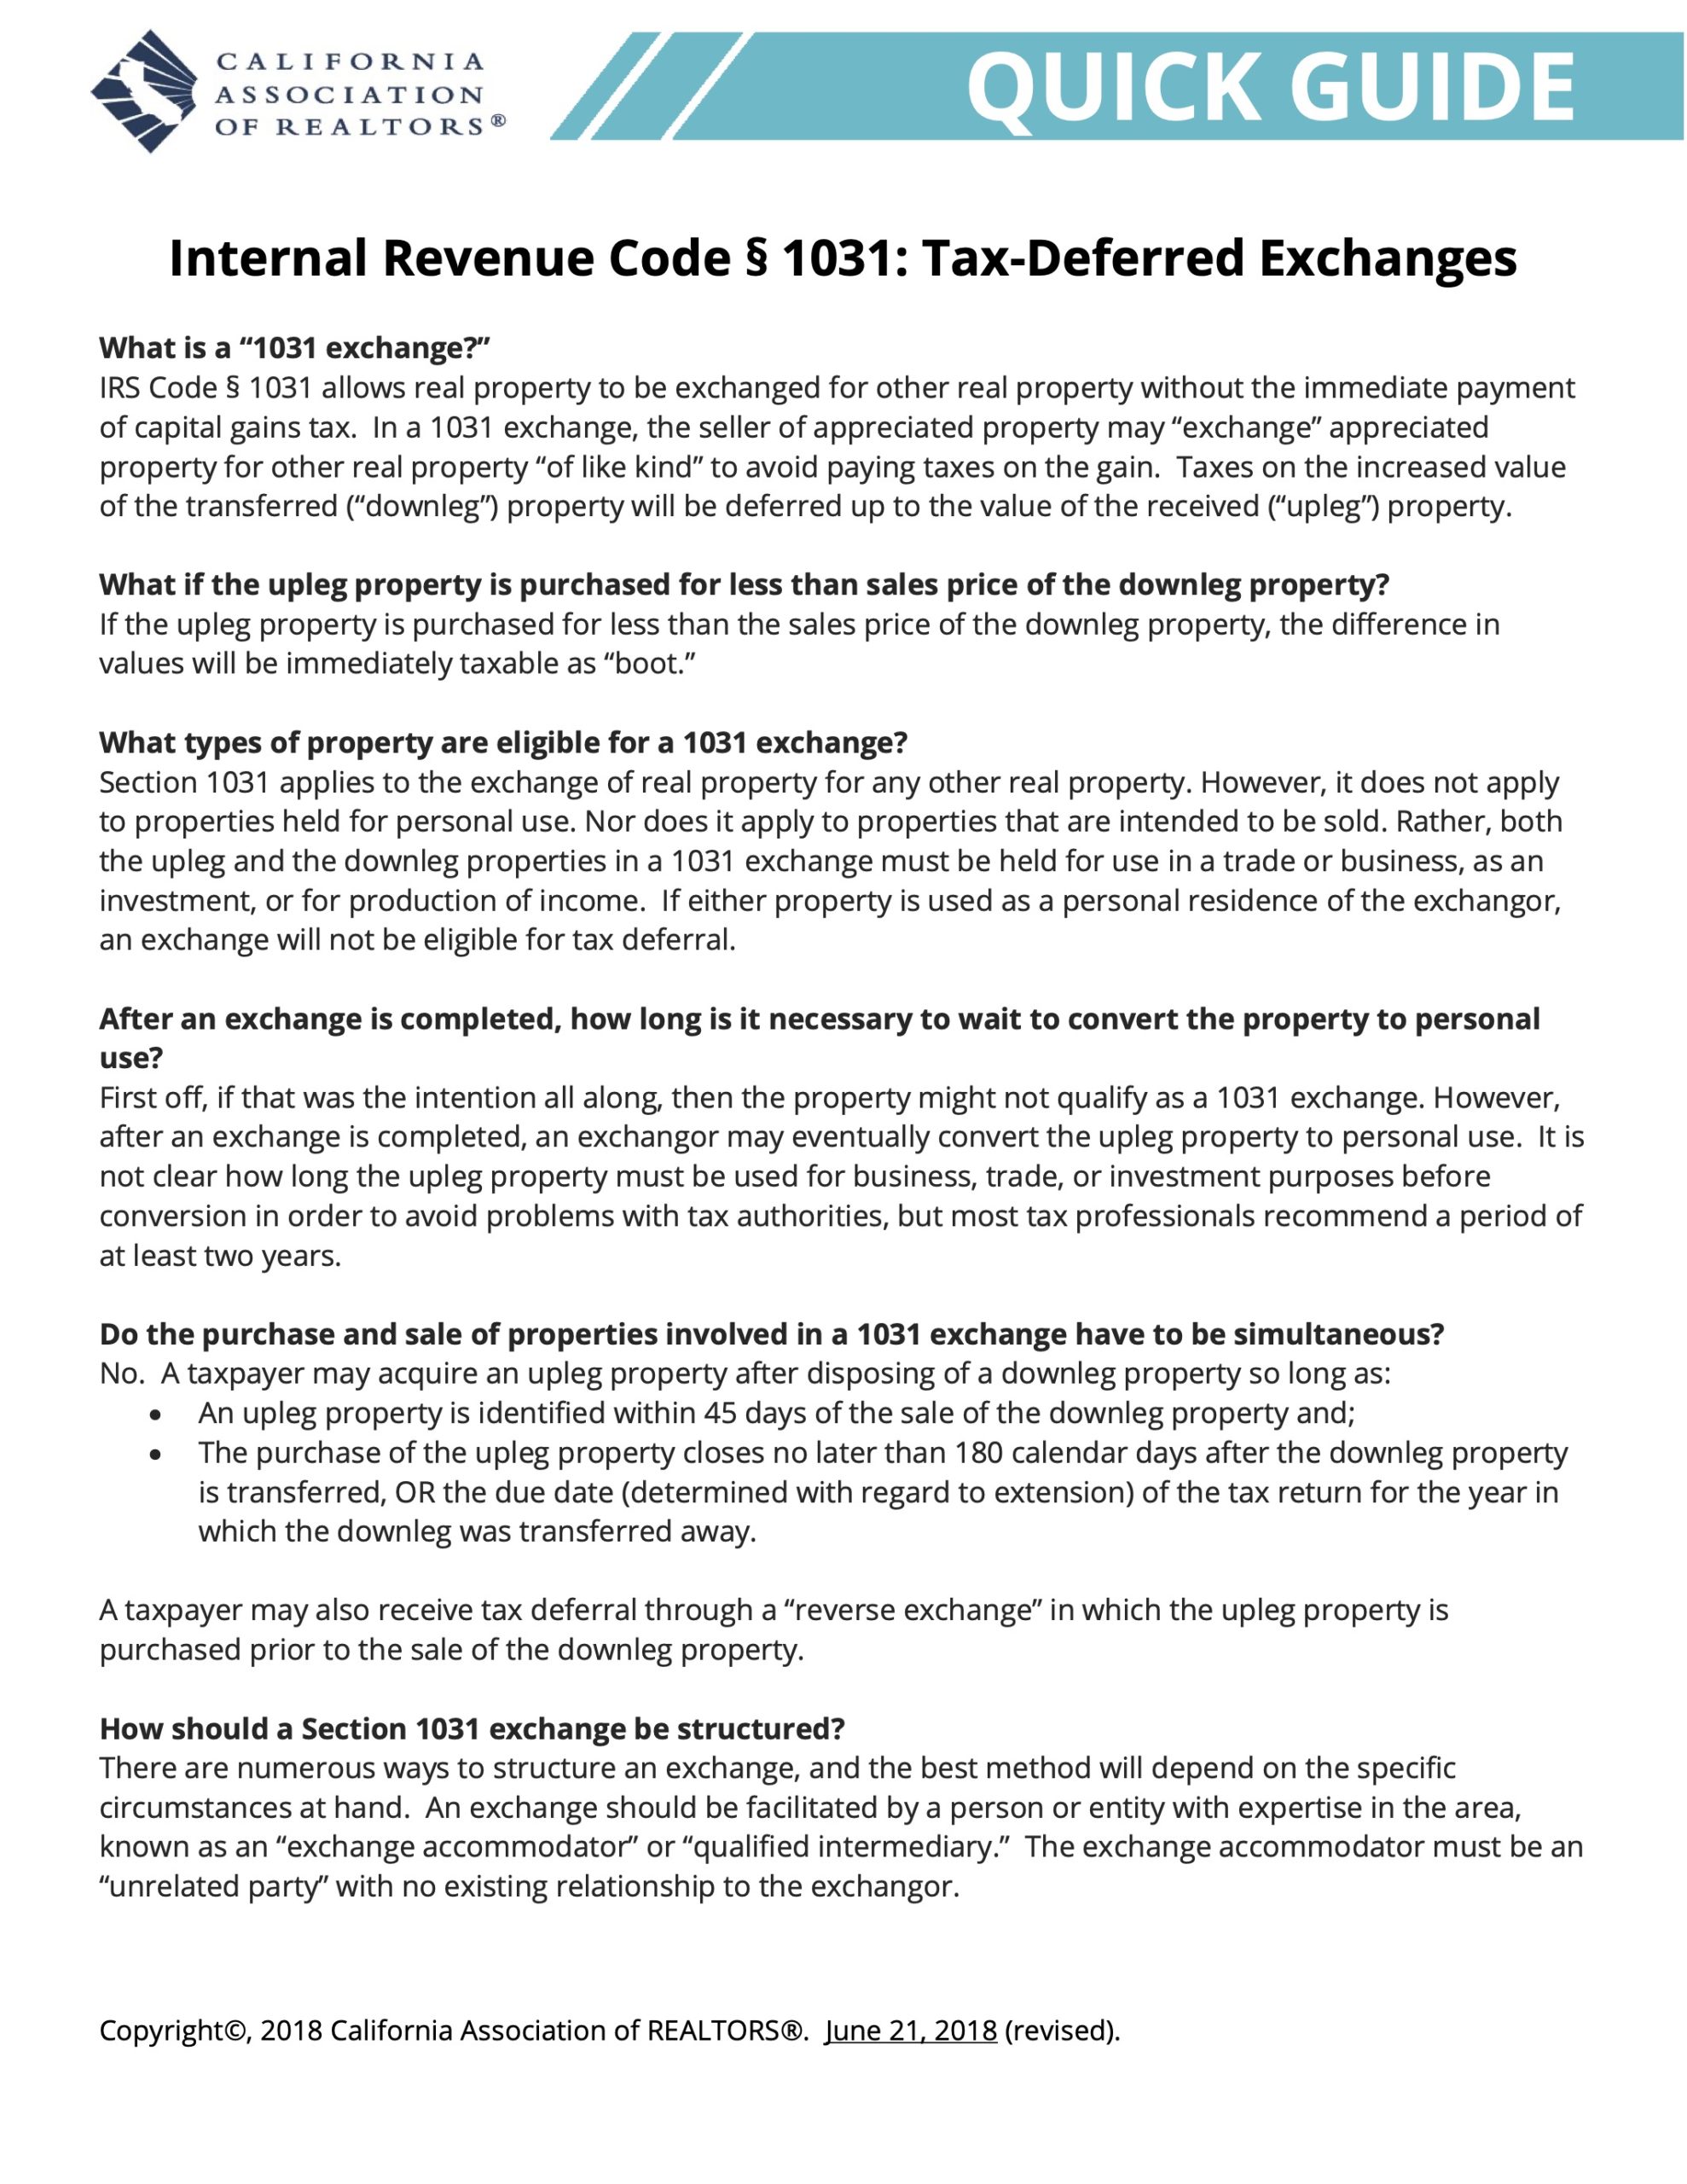 Quick Guide - Internal Revenue Code 1031-Tax-Deferred Exchanges